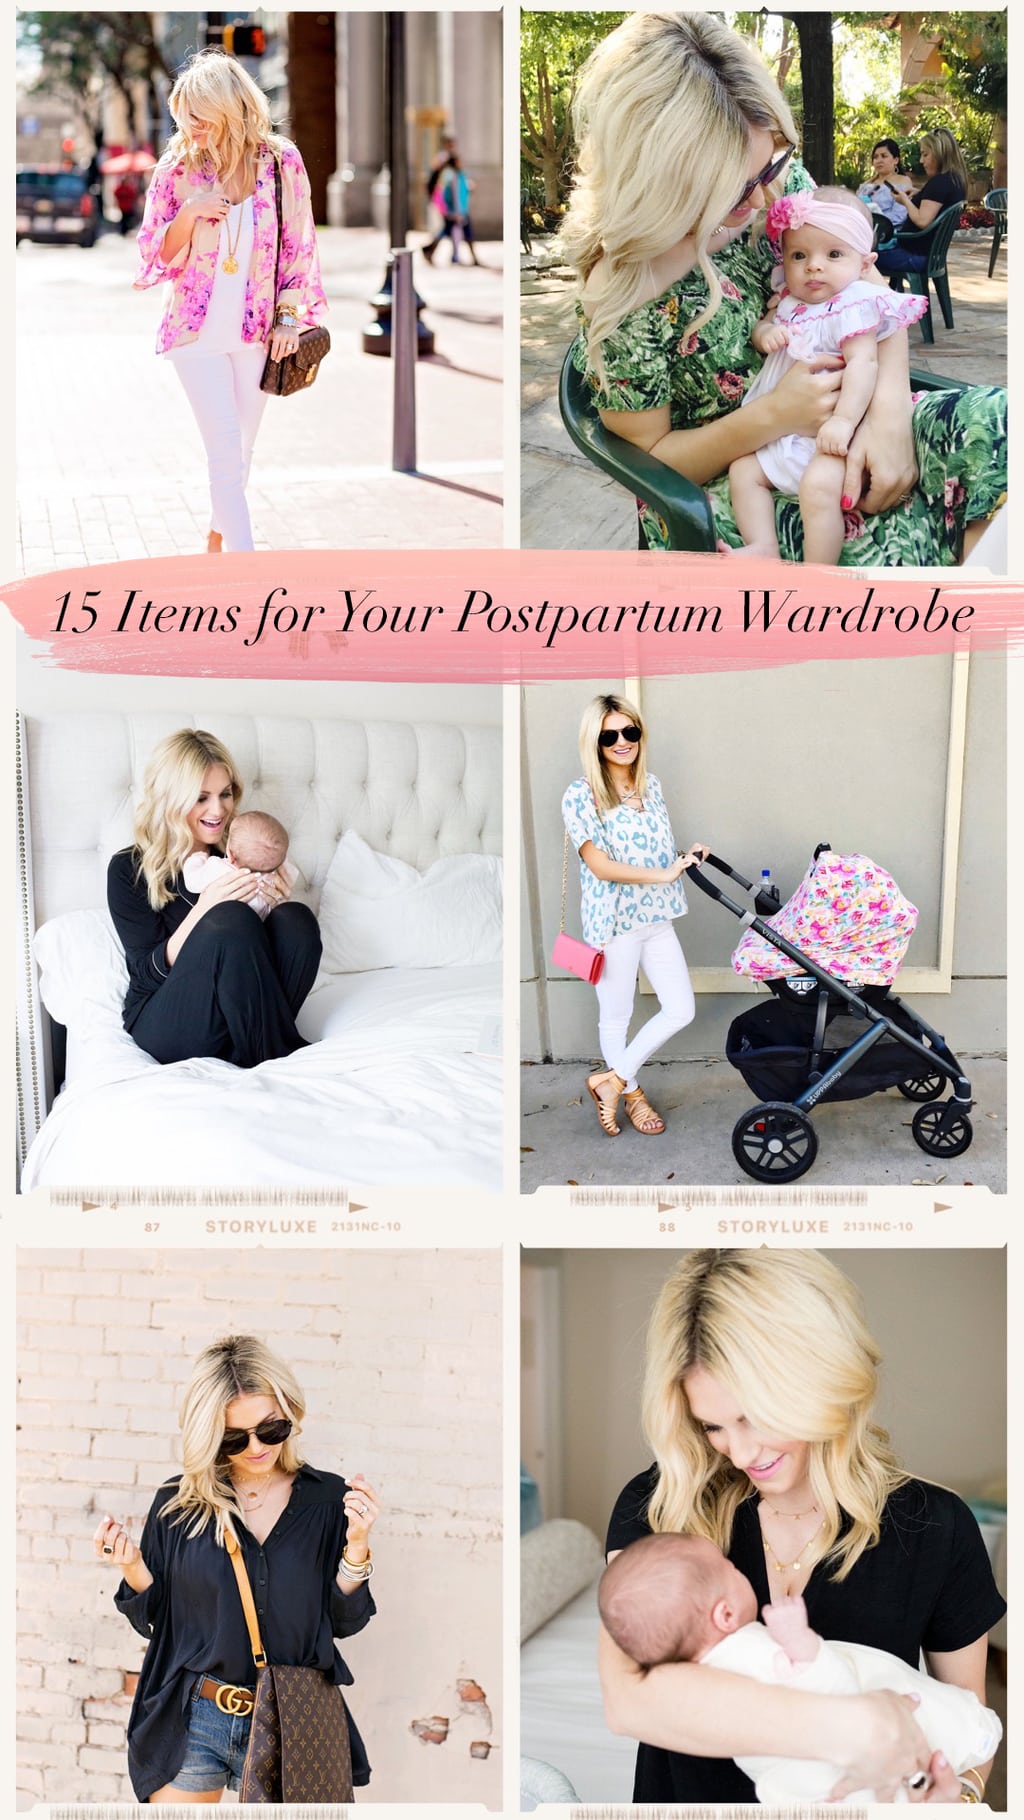 5 MUST HAVE Postpartum Outfits  cheap & affordable postpartum